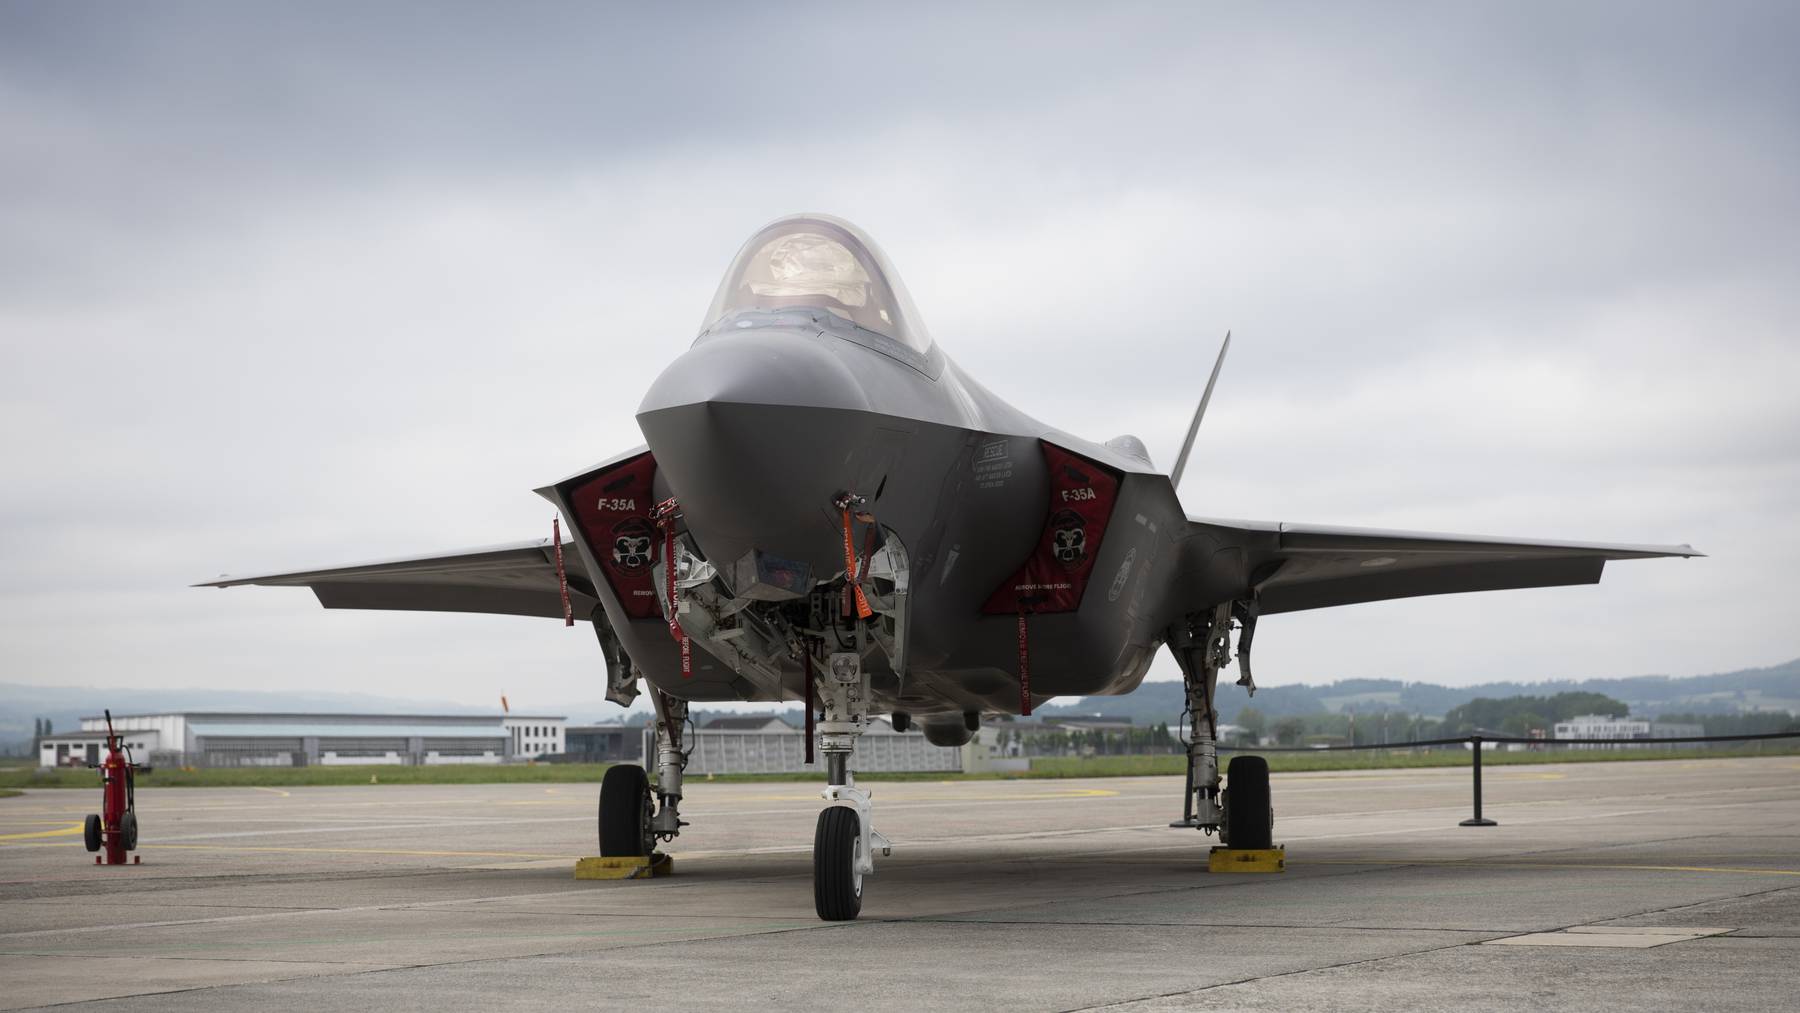 A Lockheed Martin F-35A fighter jet is pictured prior to a takeoff during a test and evaluation day at the Swiss Army airbase, in Payerne, Switzerland, Friday, June 7, 2019.